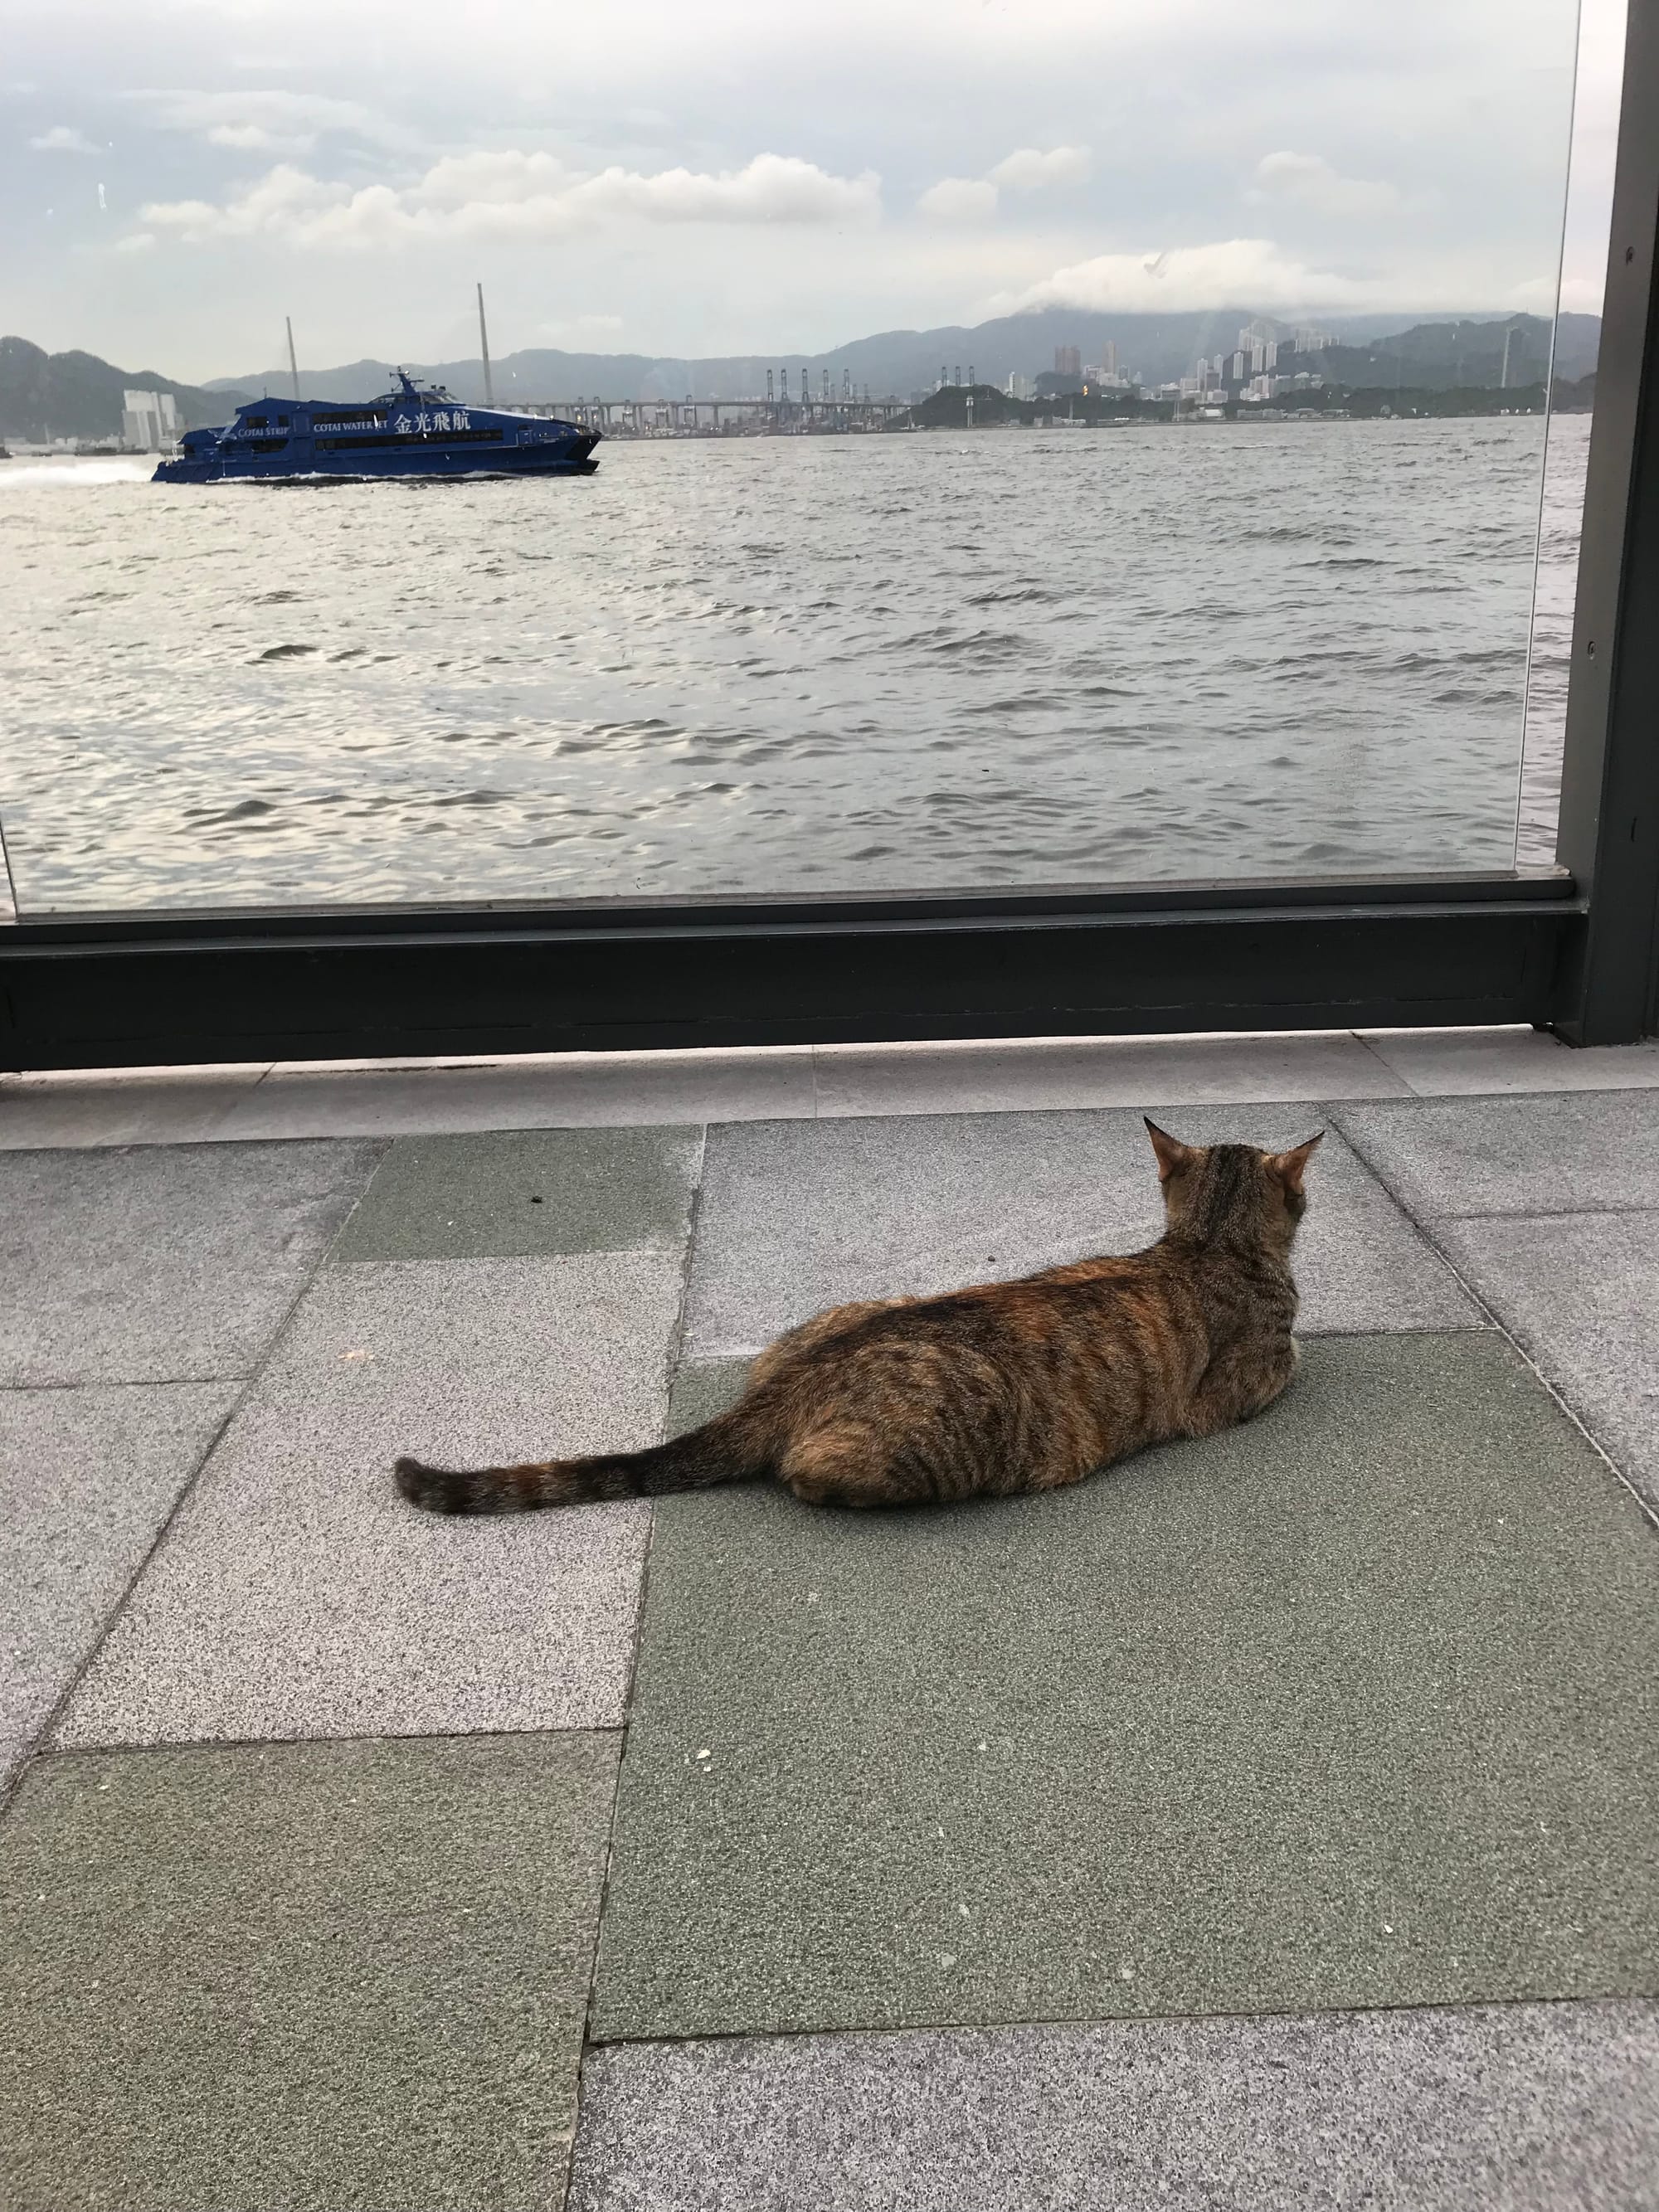 A stray tabby cat lying on the waterfront promenade admires the view of the harbour and Kowloon. A ferry speeds along the harbour on the left.